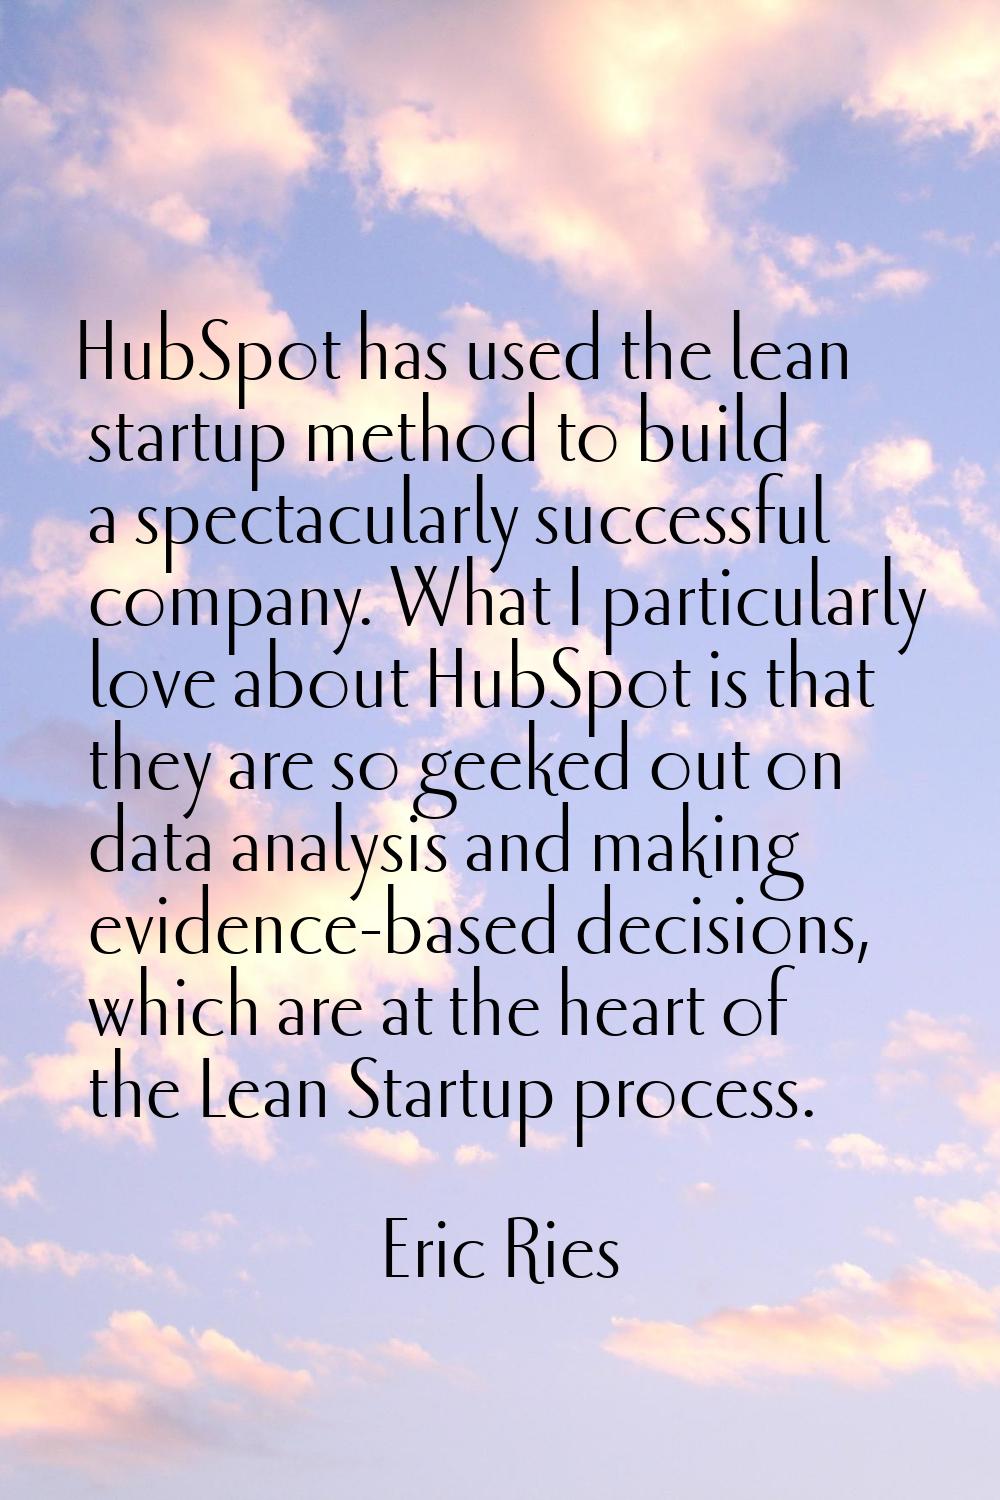 HubSpot has used the lean startup method to build a spectacularly successful company. What I partic